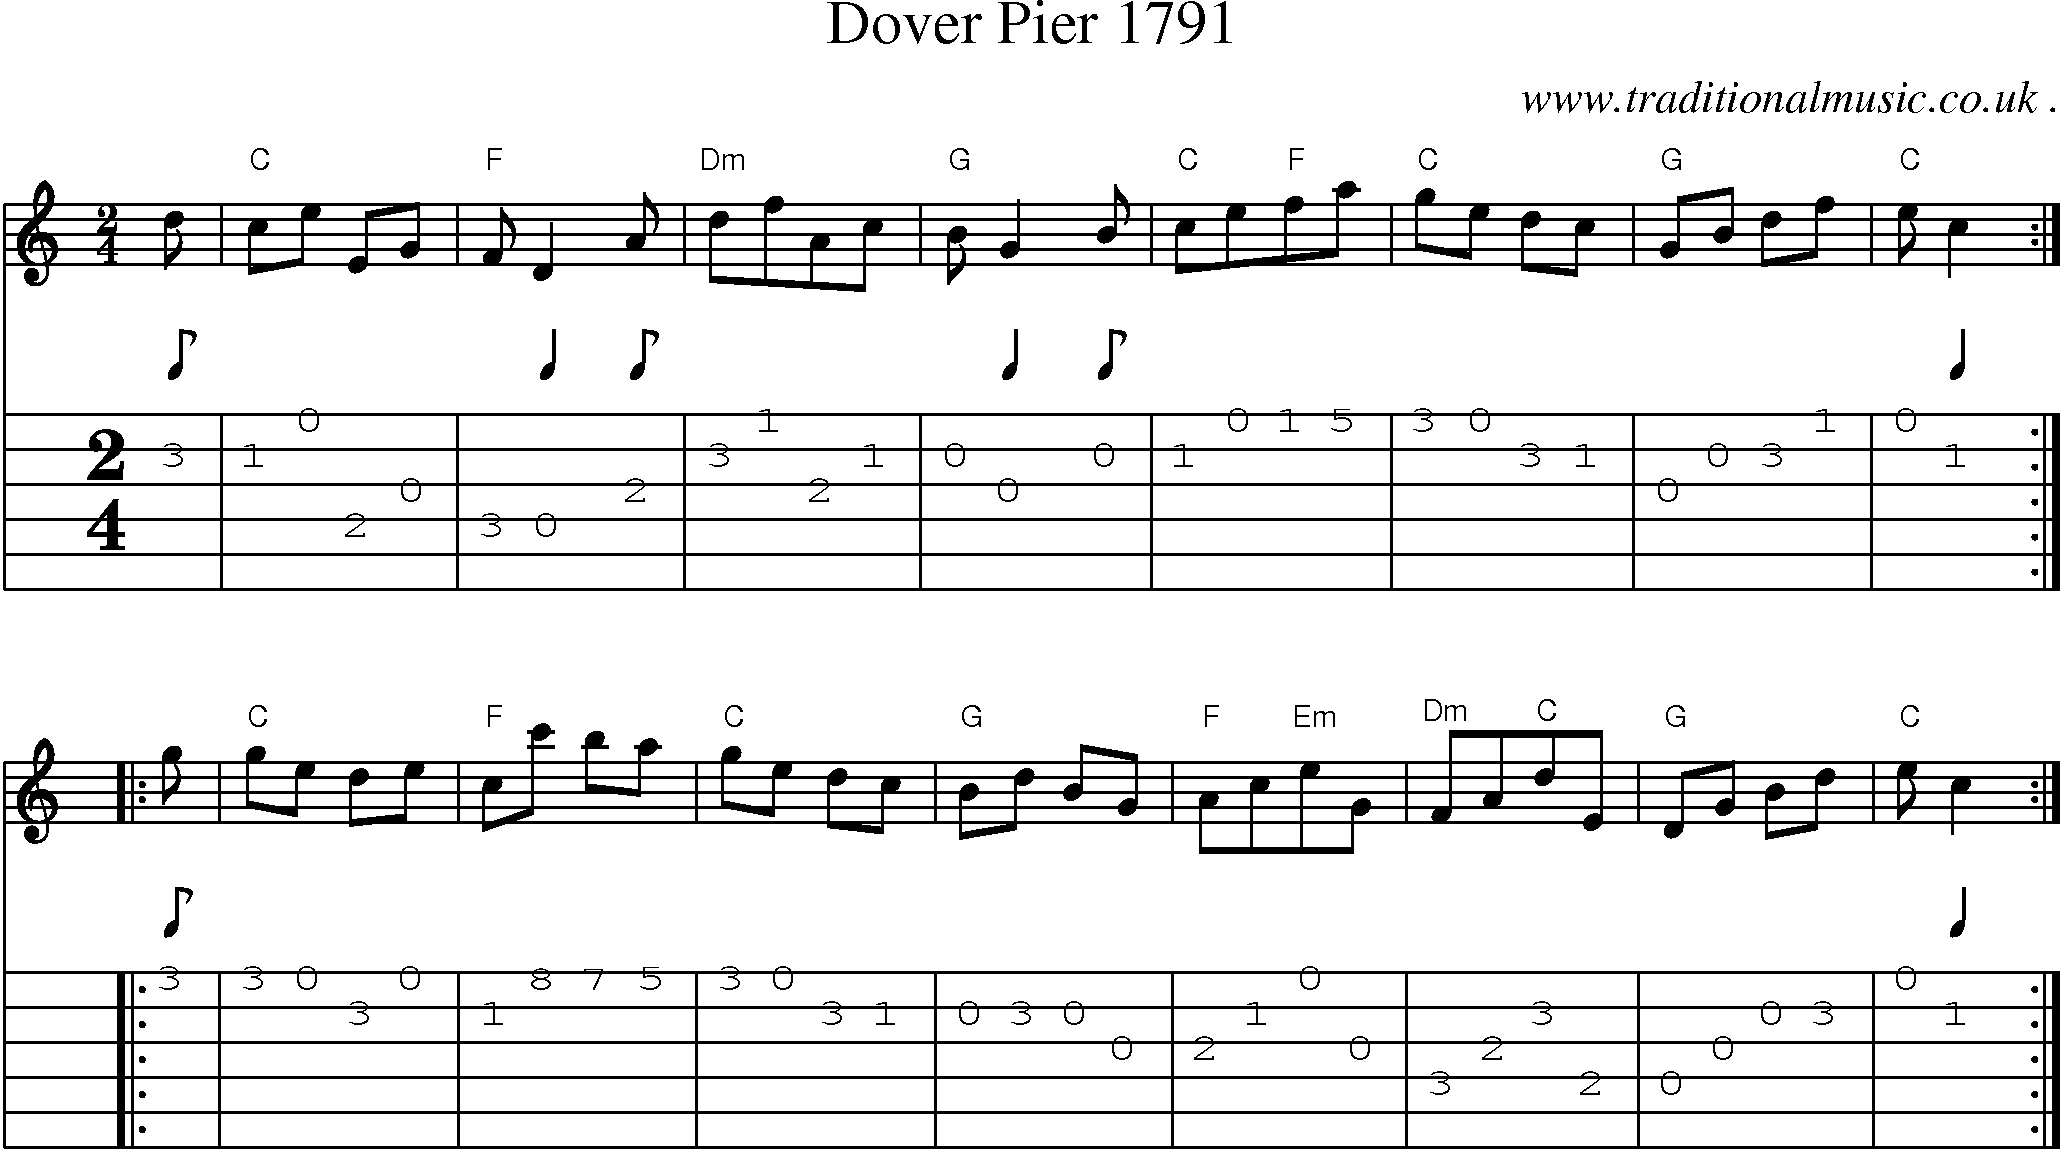 Sheet-Music and Guitar Tabs for Dover Pier 1791